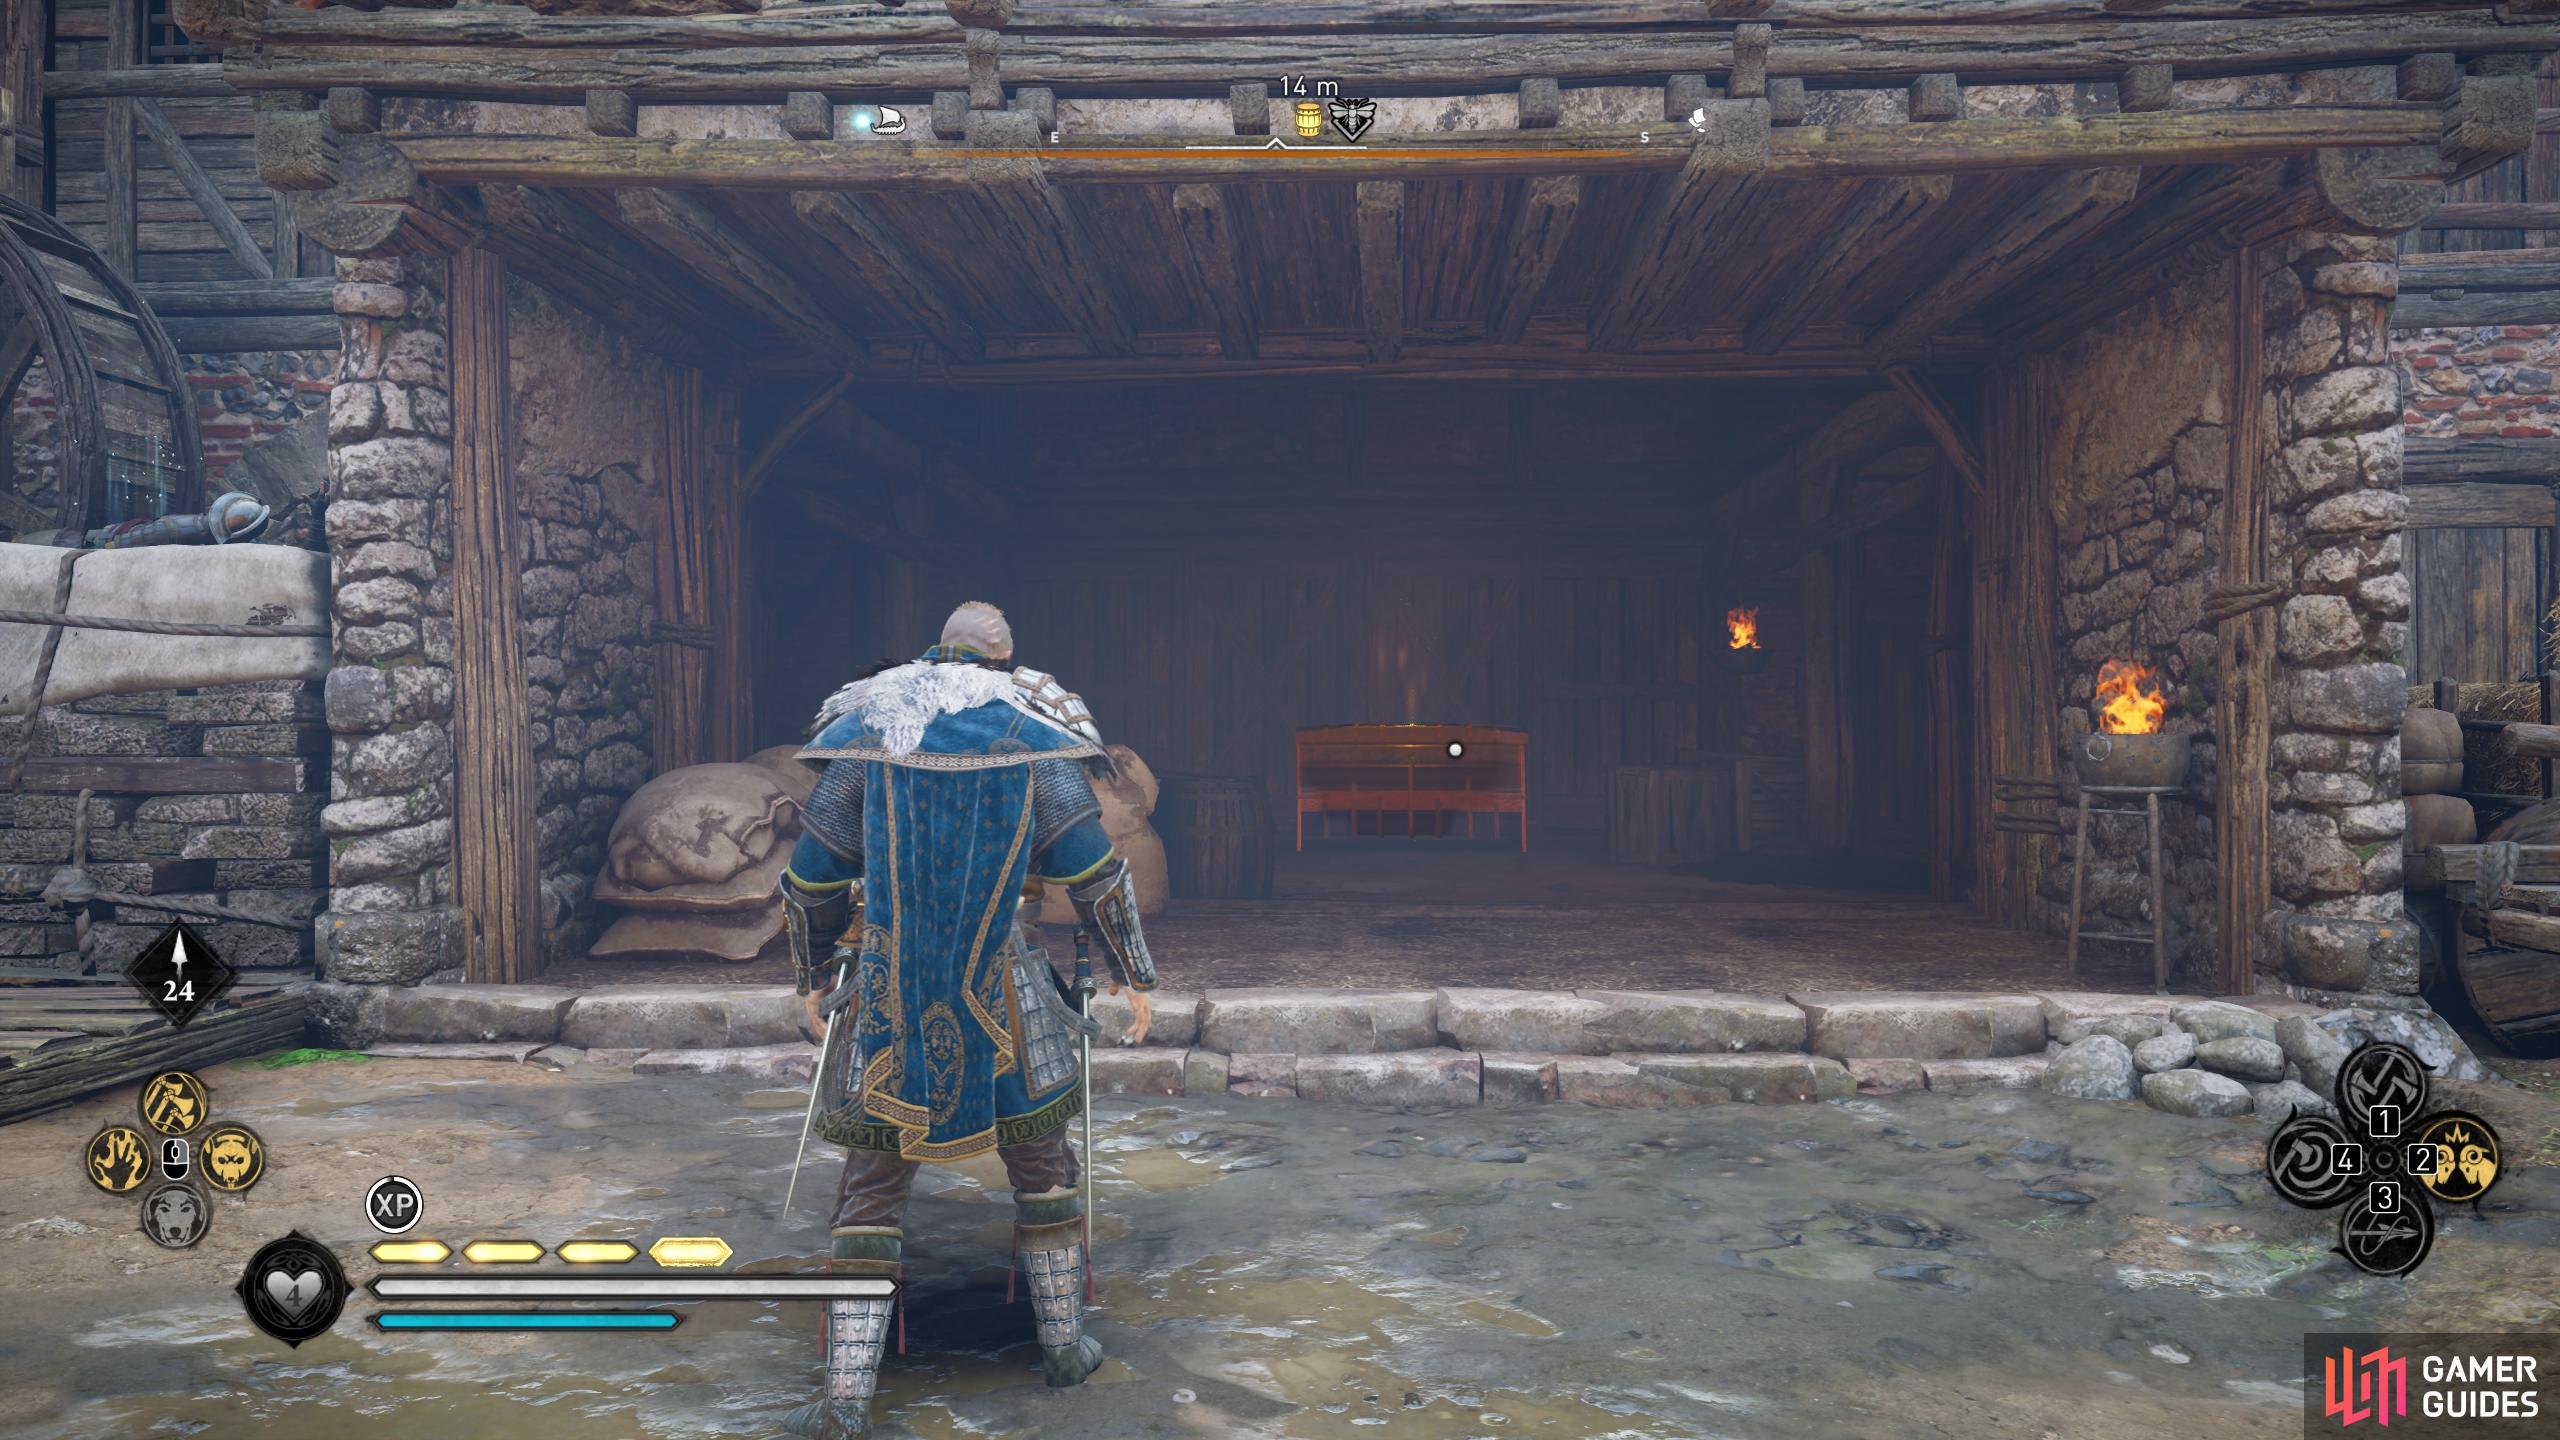 Youll find the chest in the open, beneath a wooden platform.